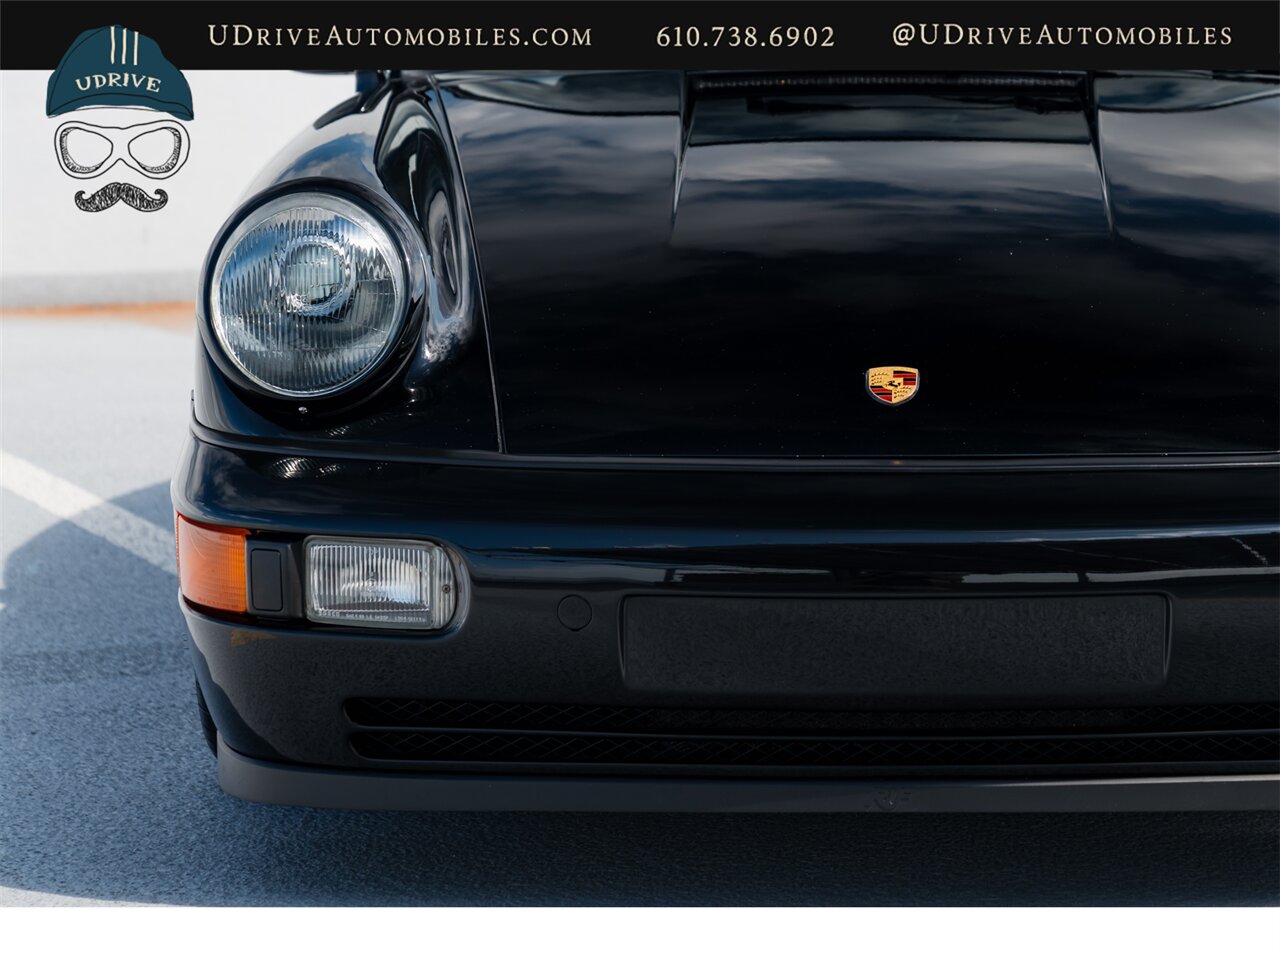 1989 Porsche 911 Carrera 4  964 C4 5 Speed Manual $63k Recent Service and Upgrades - Photo 12 - West Chester, PA 19382